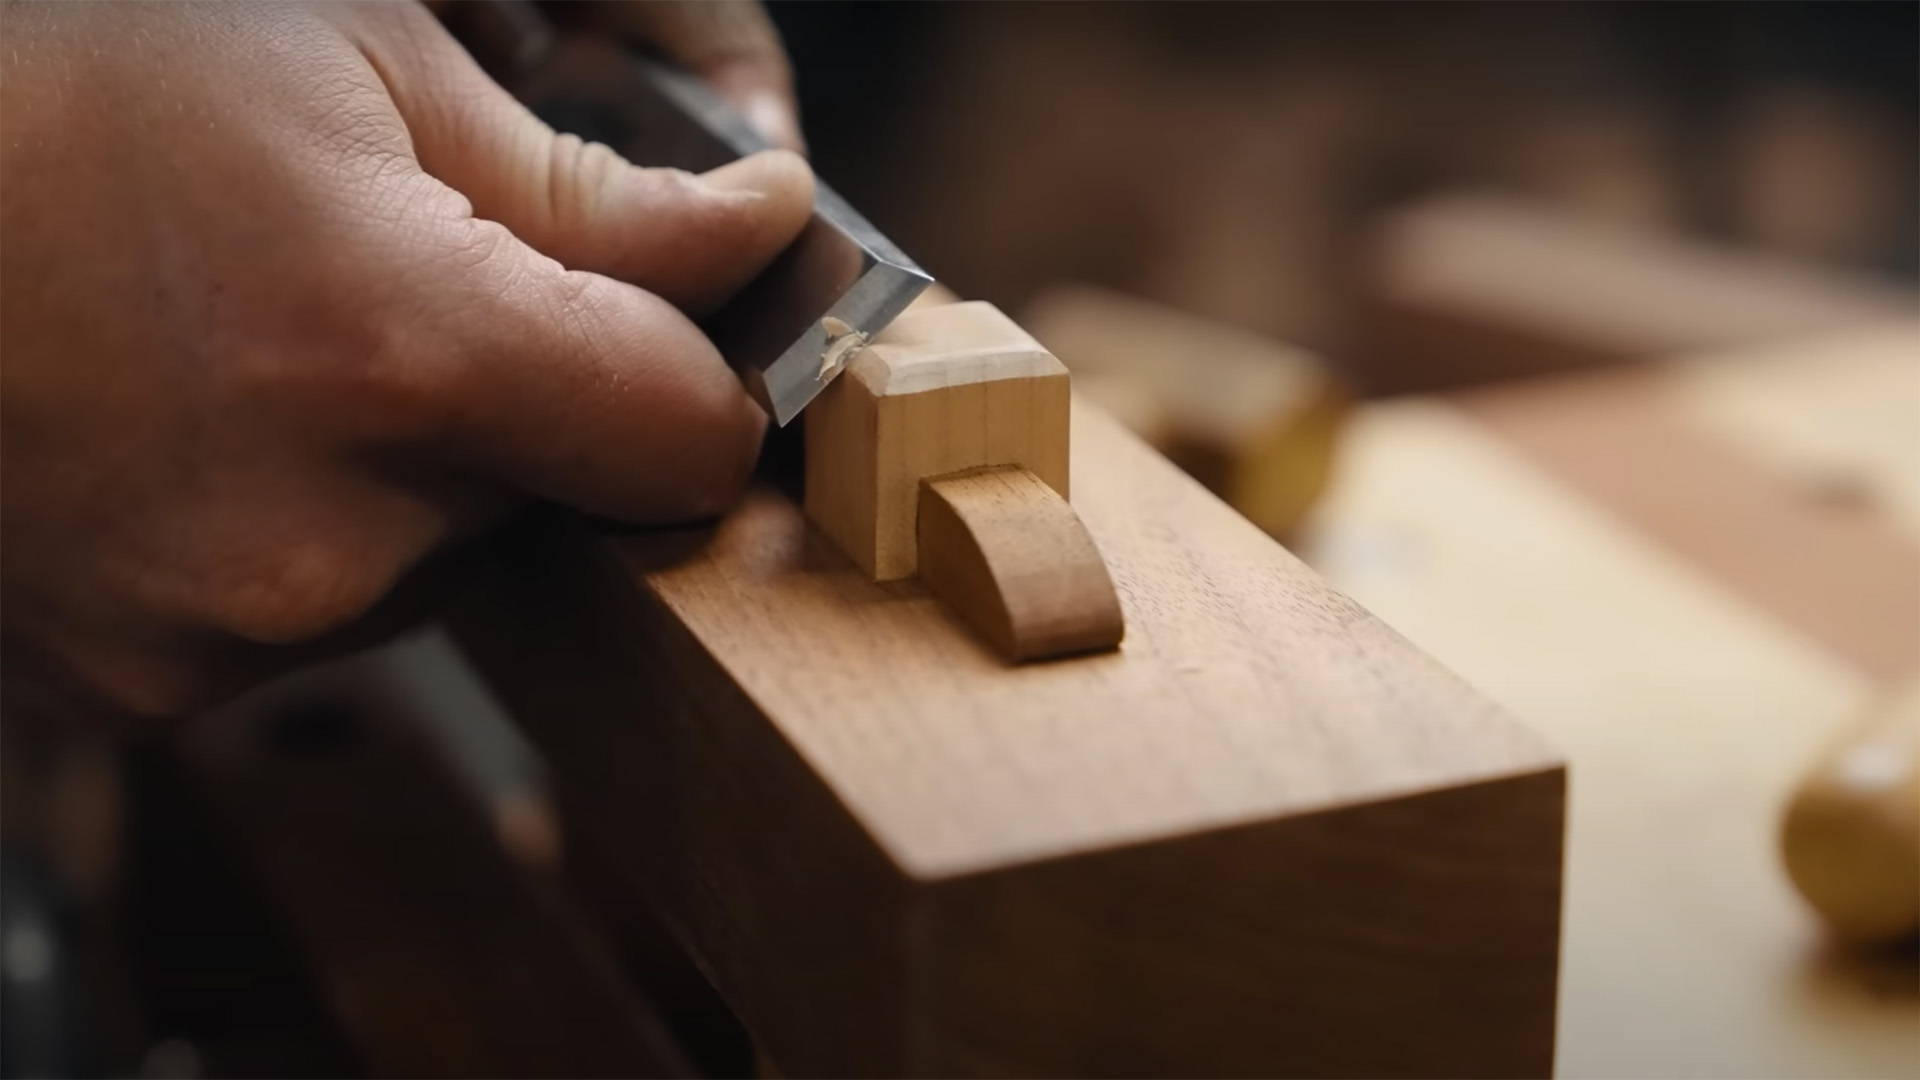 chamfering an edge with a chisel